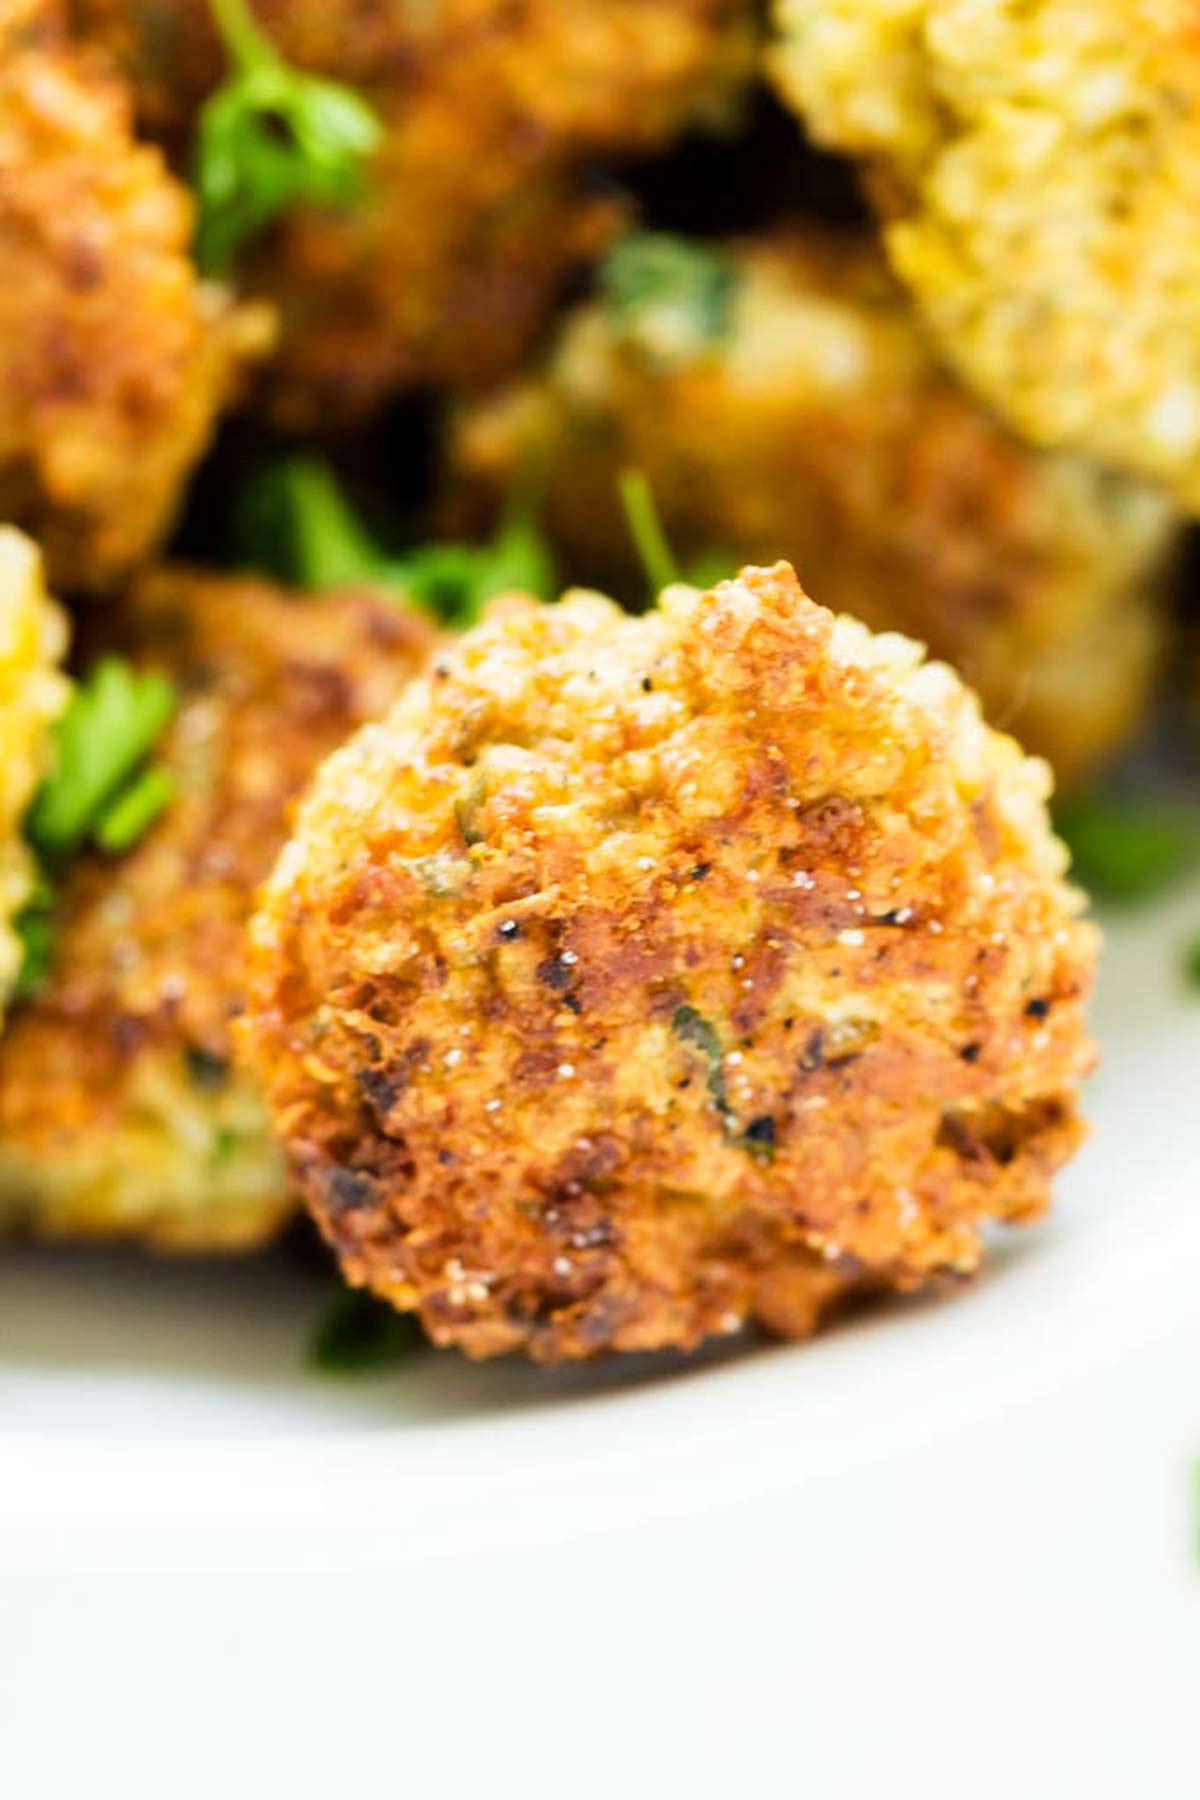 Close up photo of a quinoa fritter on a white plate with other quinoa fritters behind it.